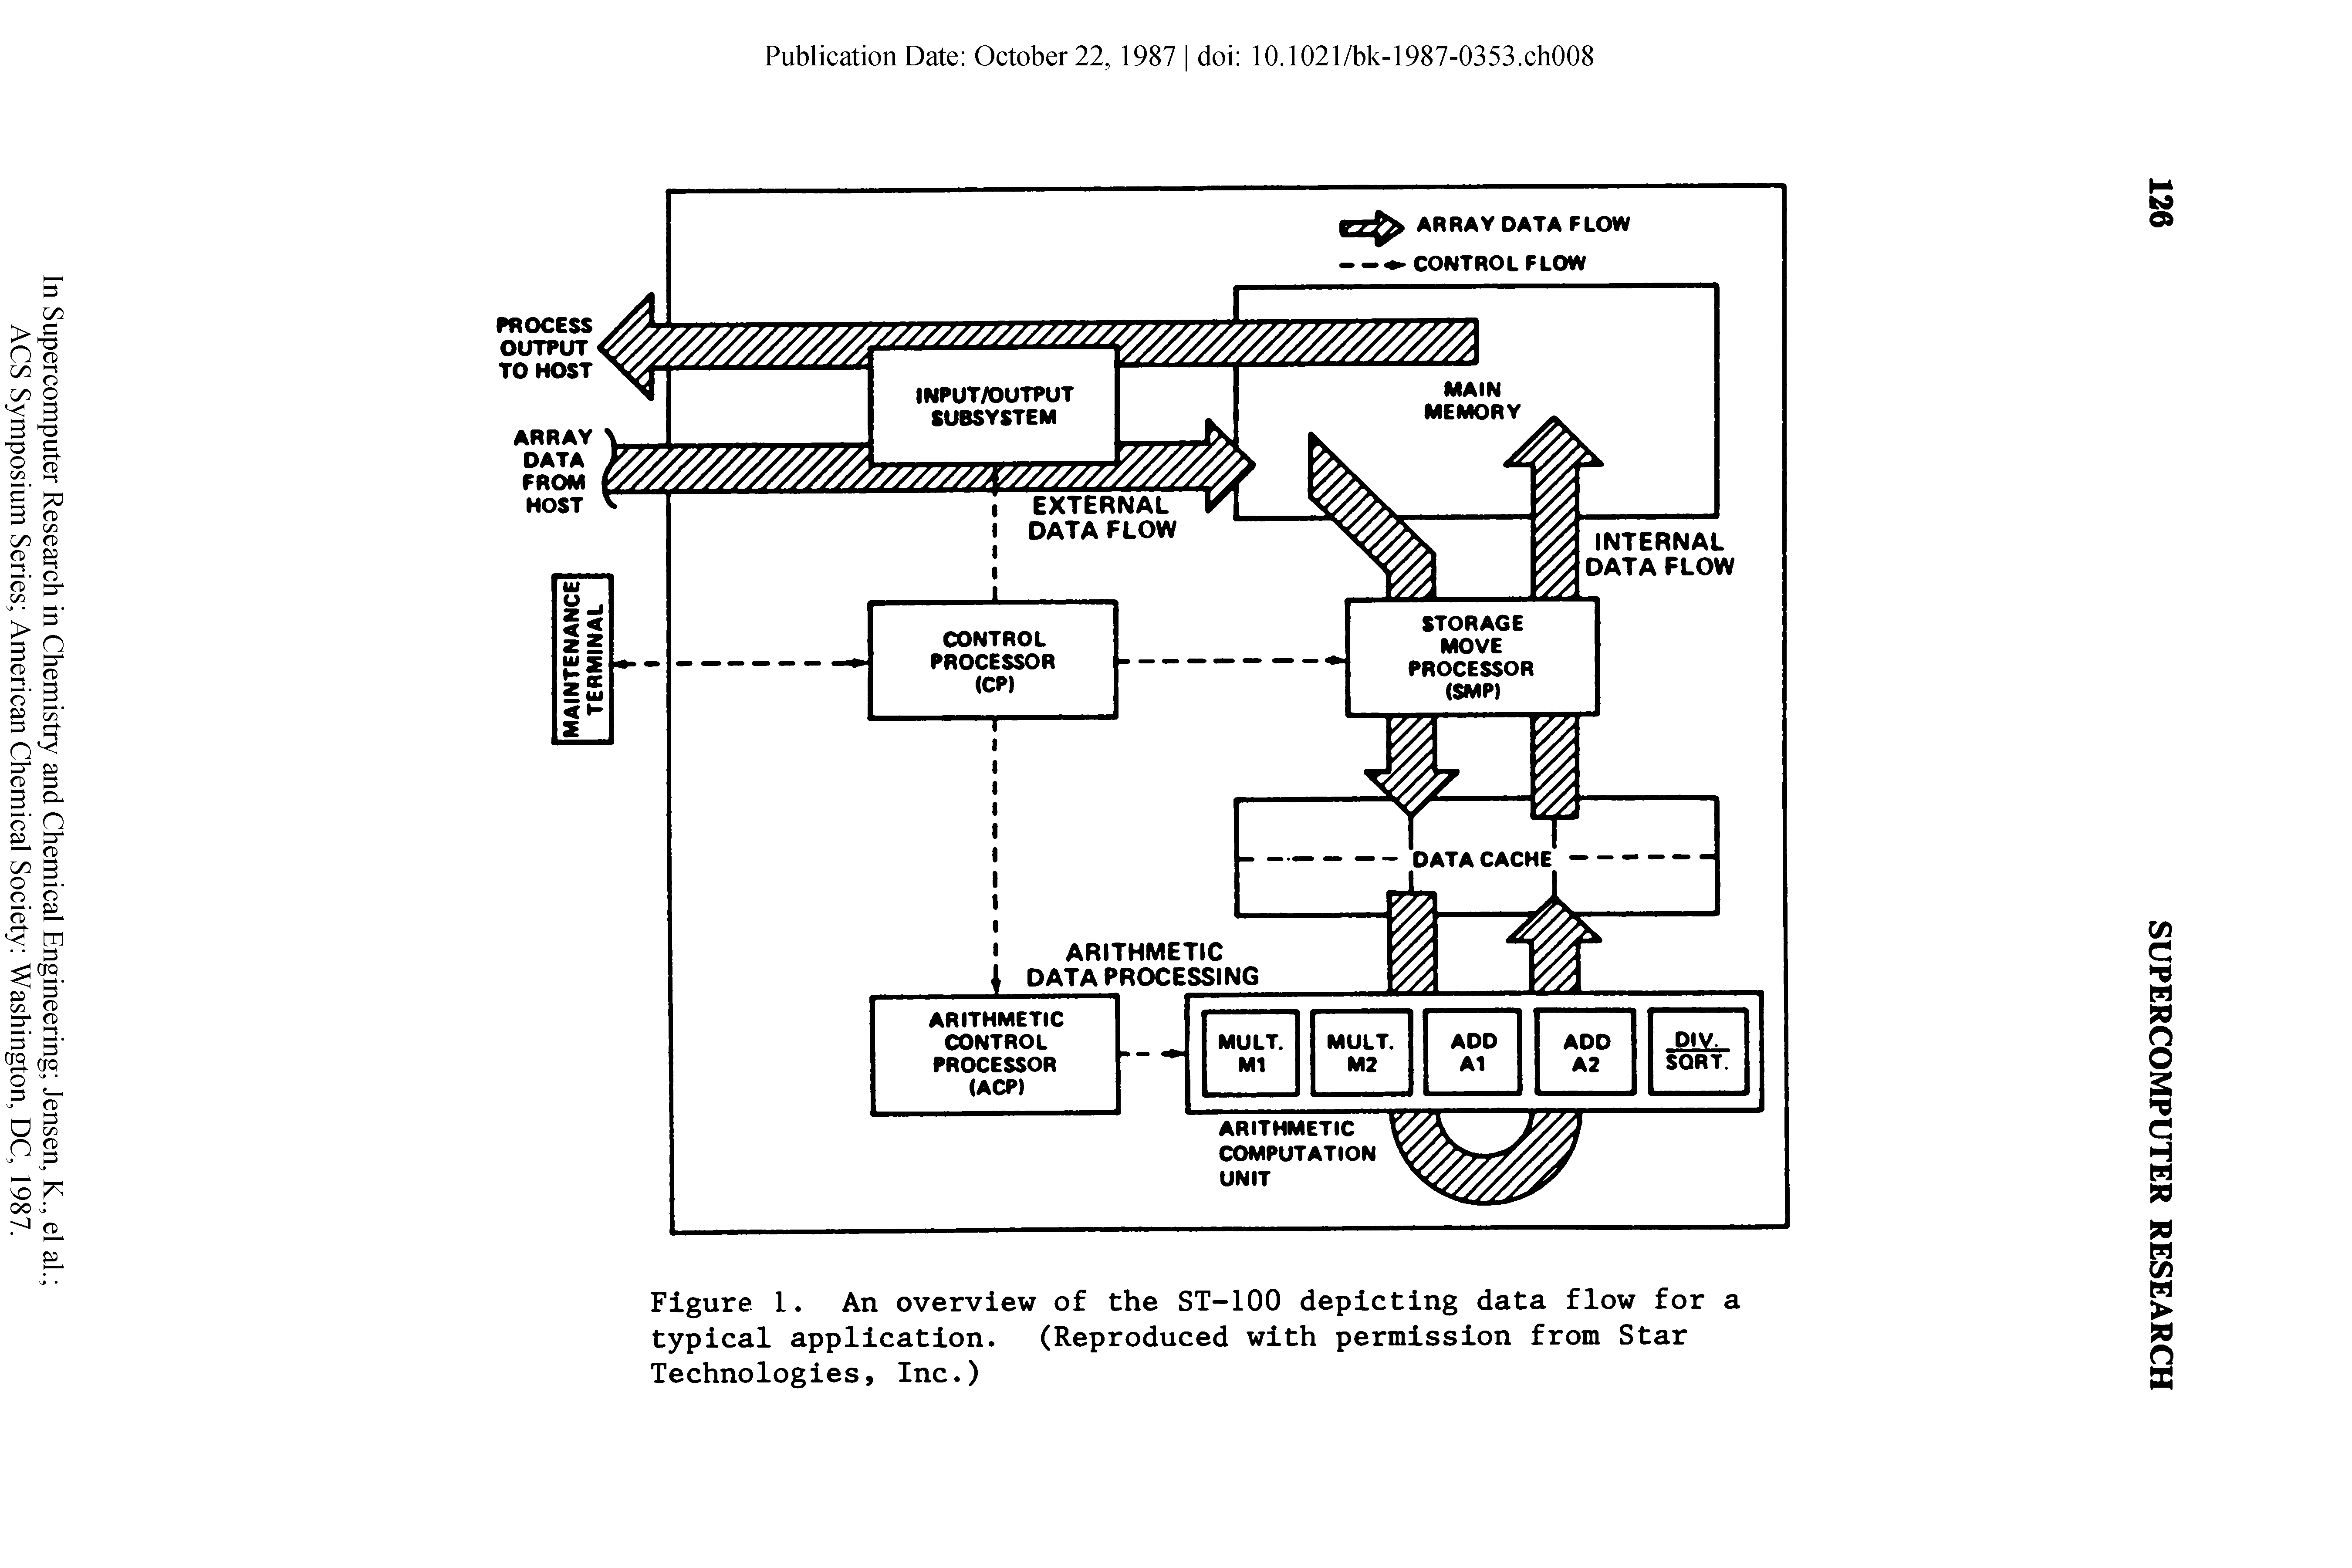 Figure 1. An overview of the ST-100 depicting data flow for a typical application. (Reproduced with permission from Star Technologies, Inc.)...